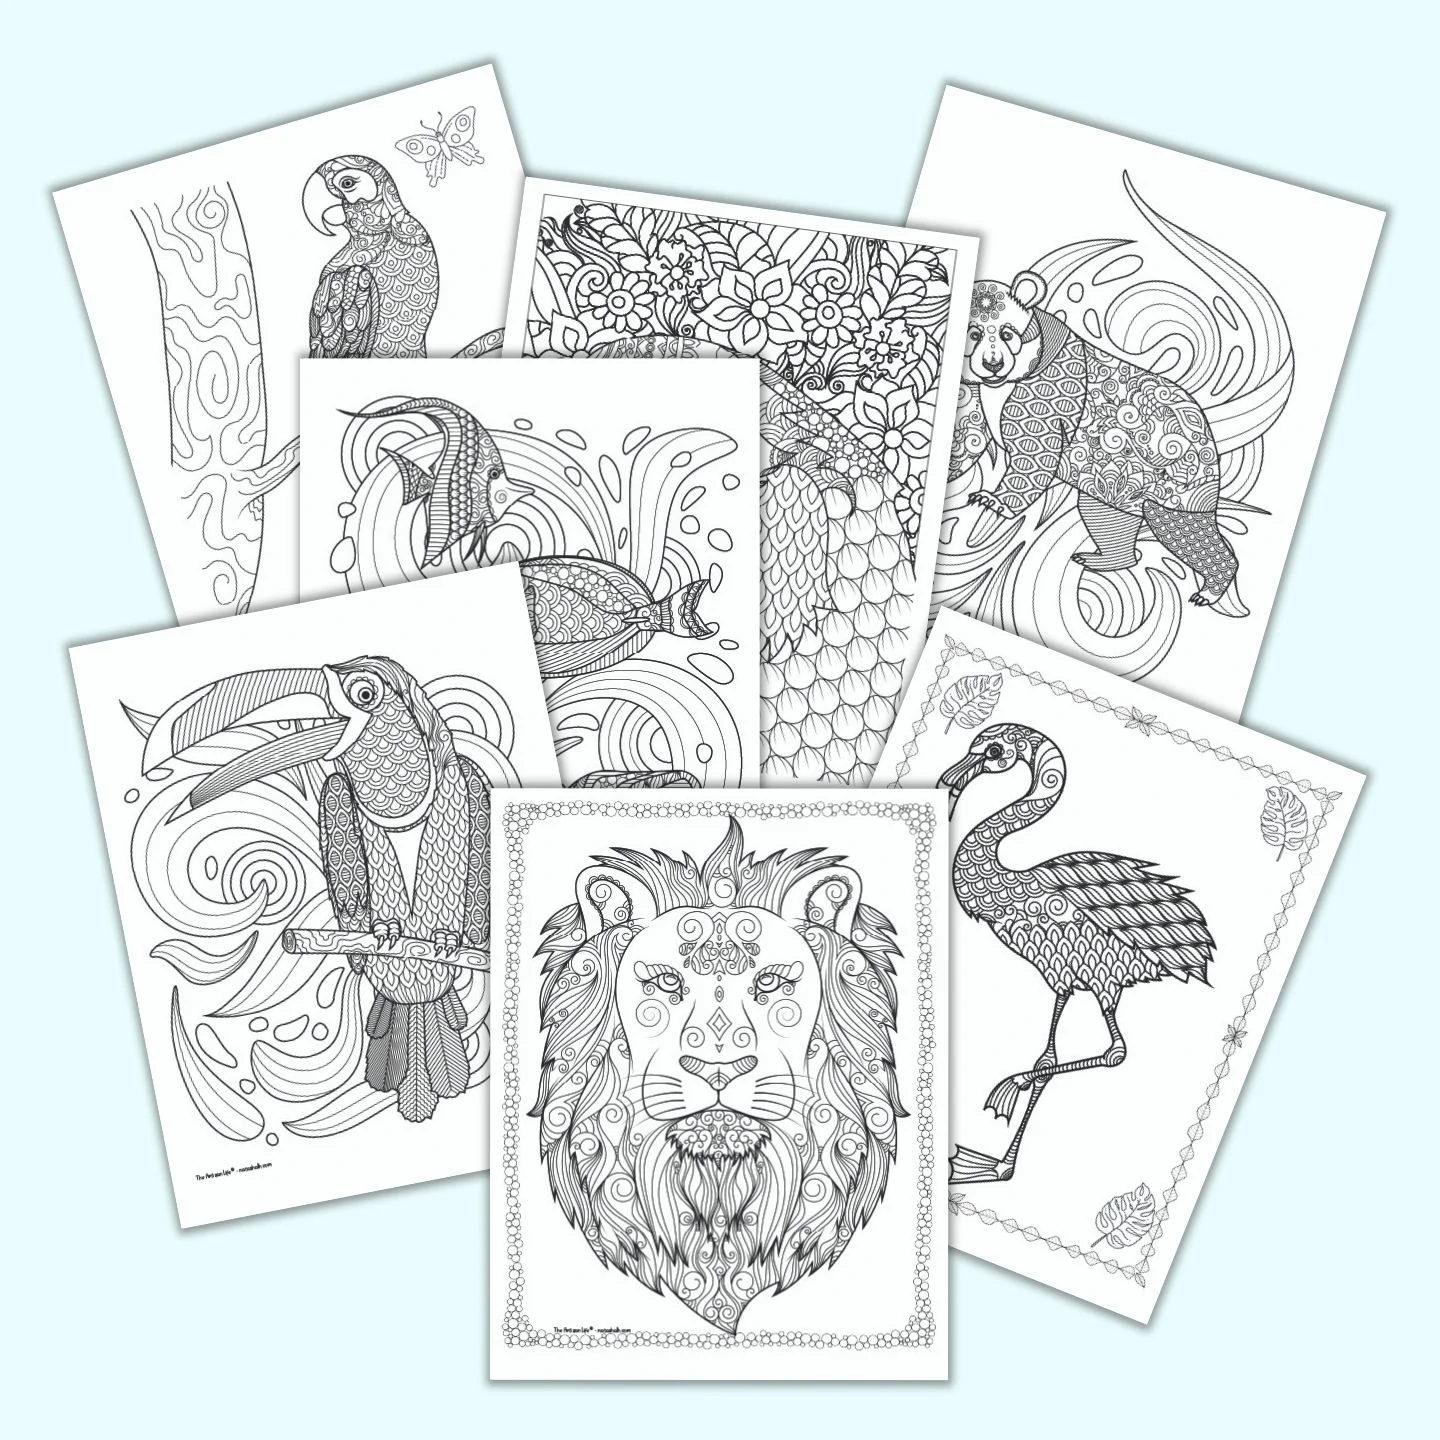 20 Free Animal Coloring Pages for Adults   The Artisan Life